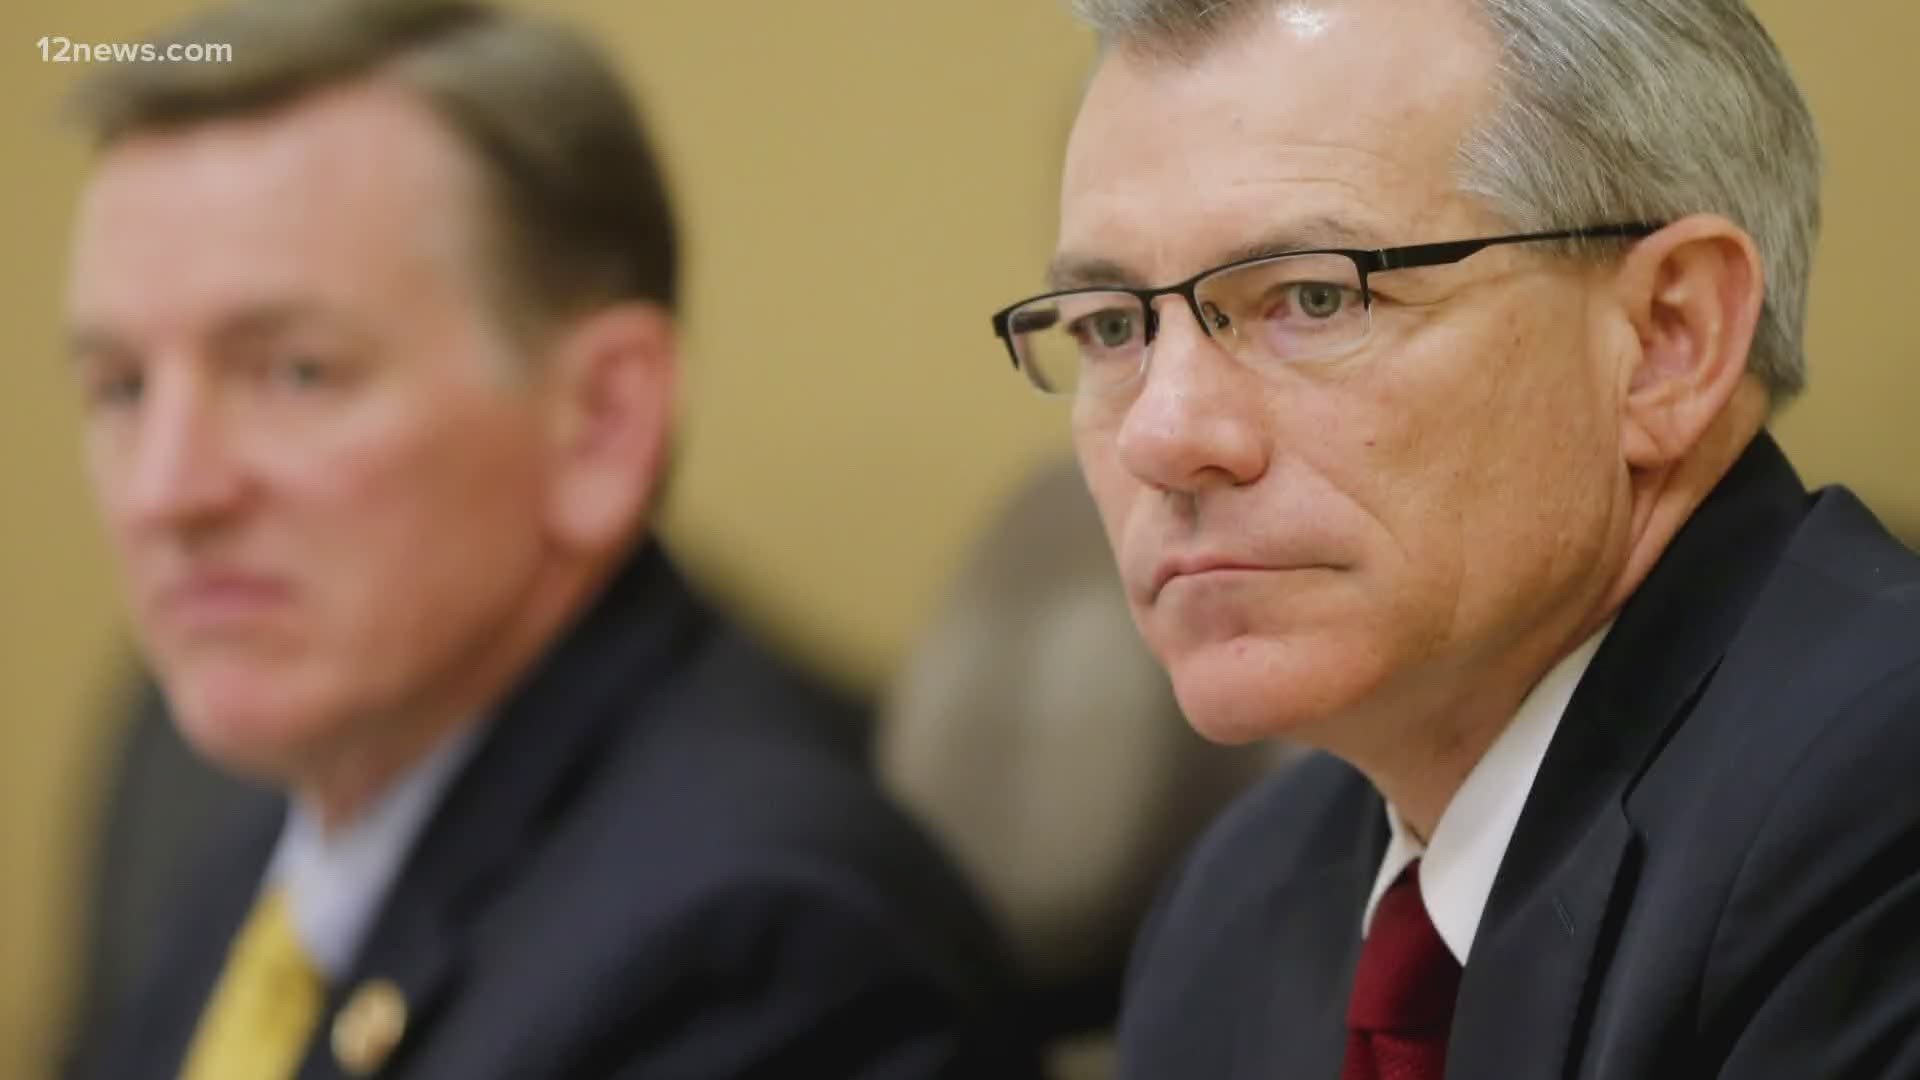 Republican David Schweikert was formally reprimanded by the House on Friday. It's the first time in eight years that's happened to a member.